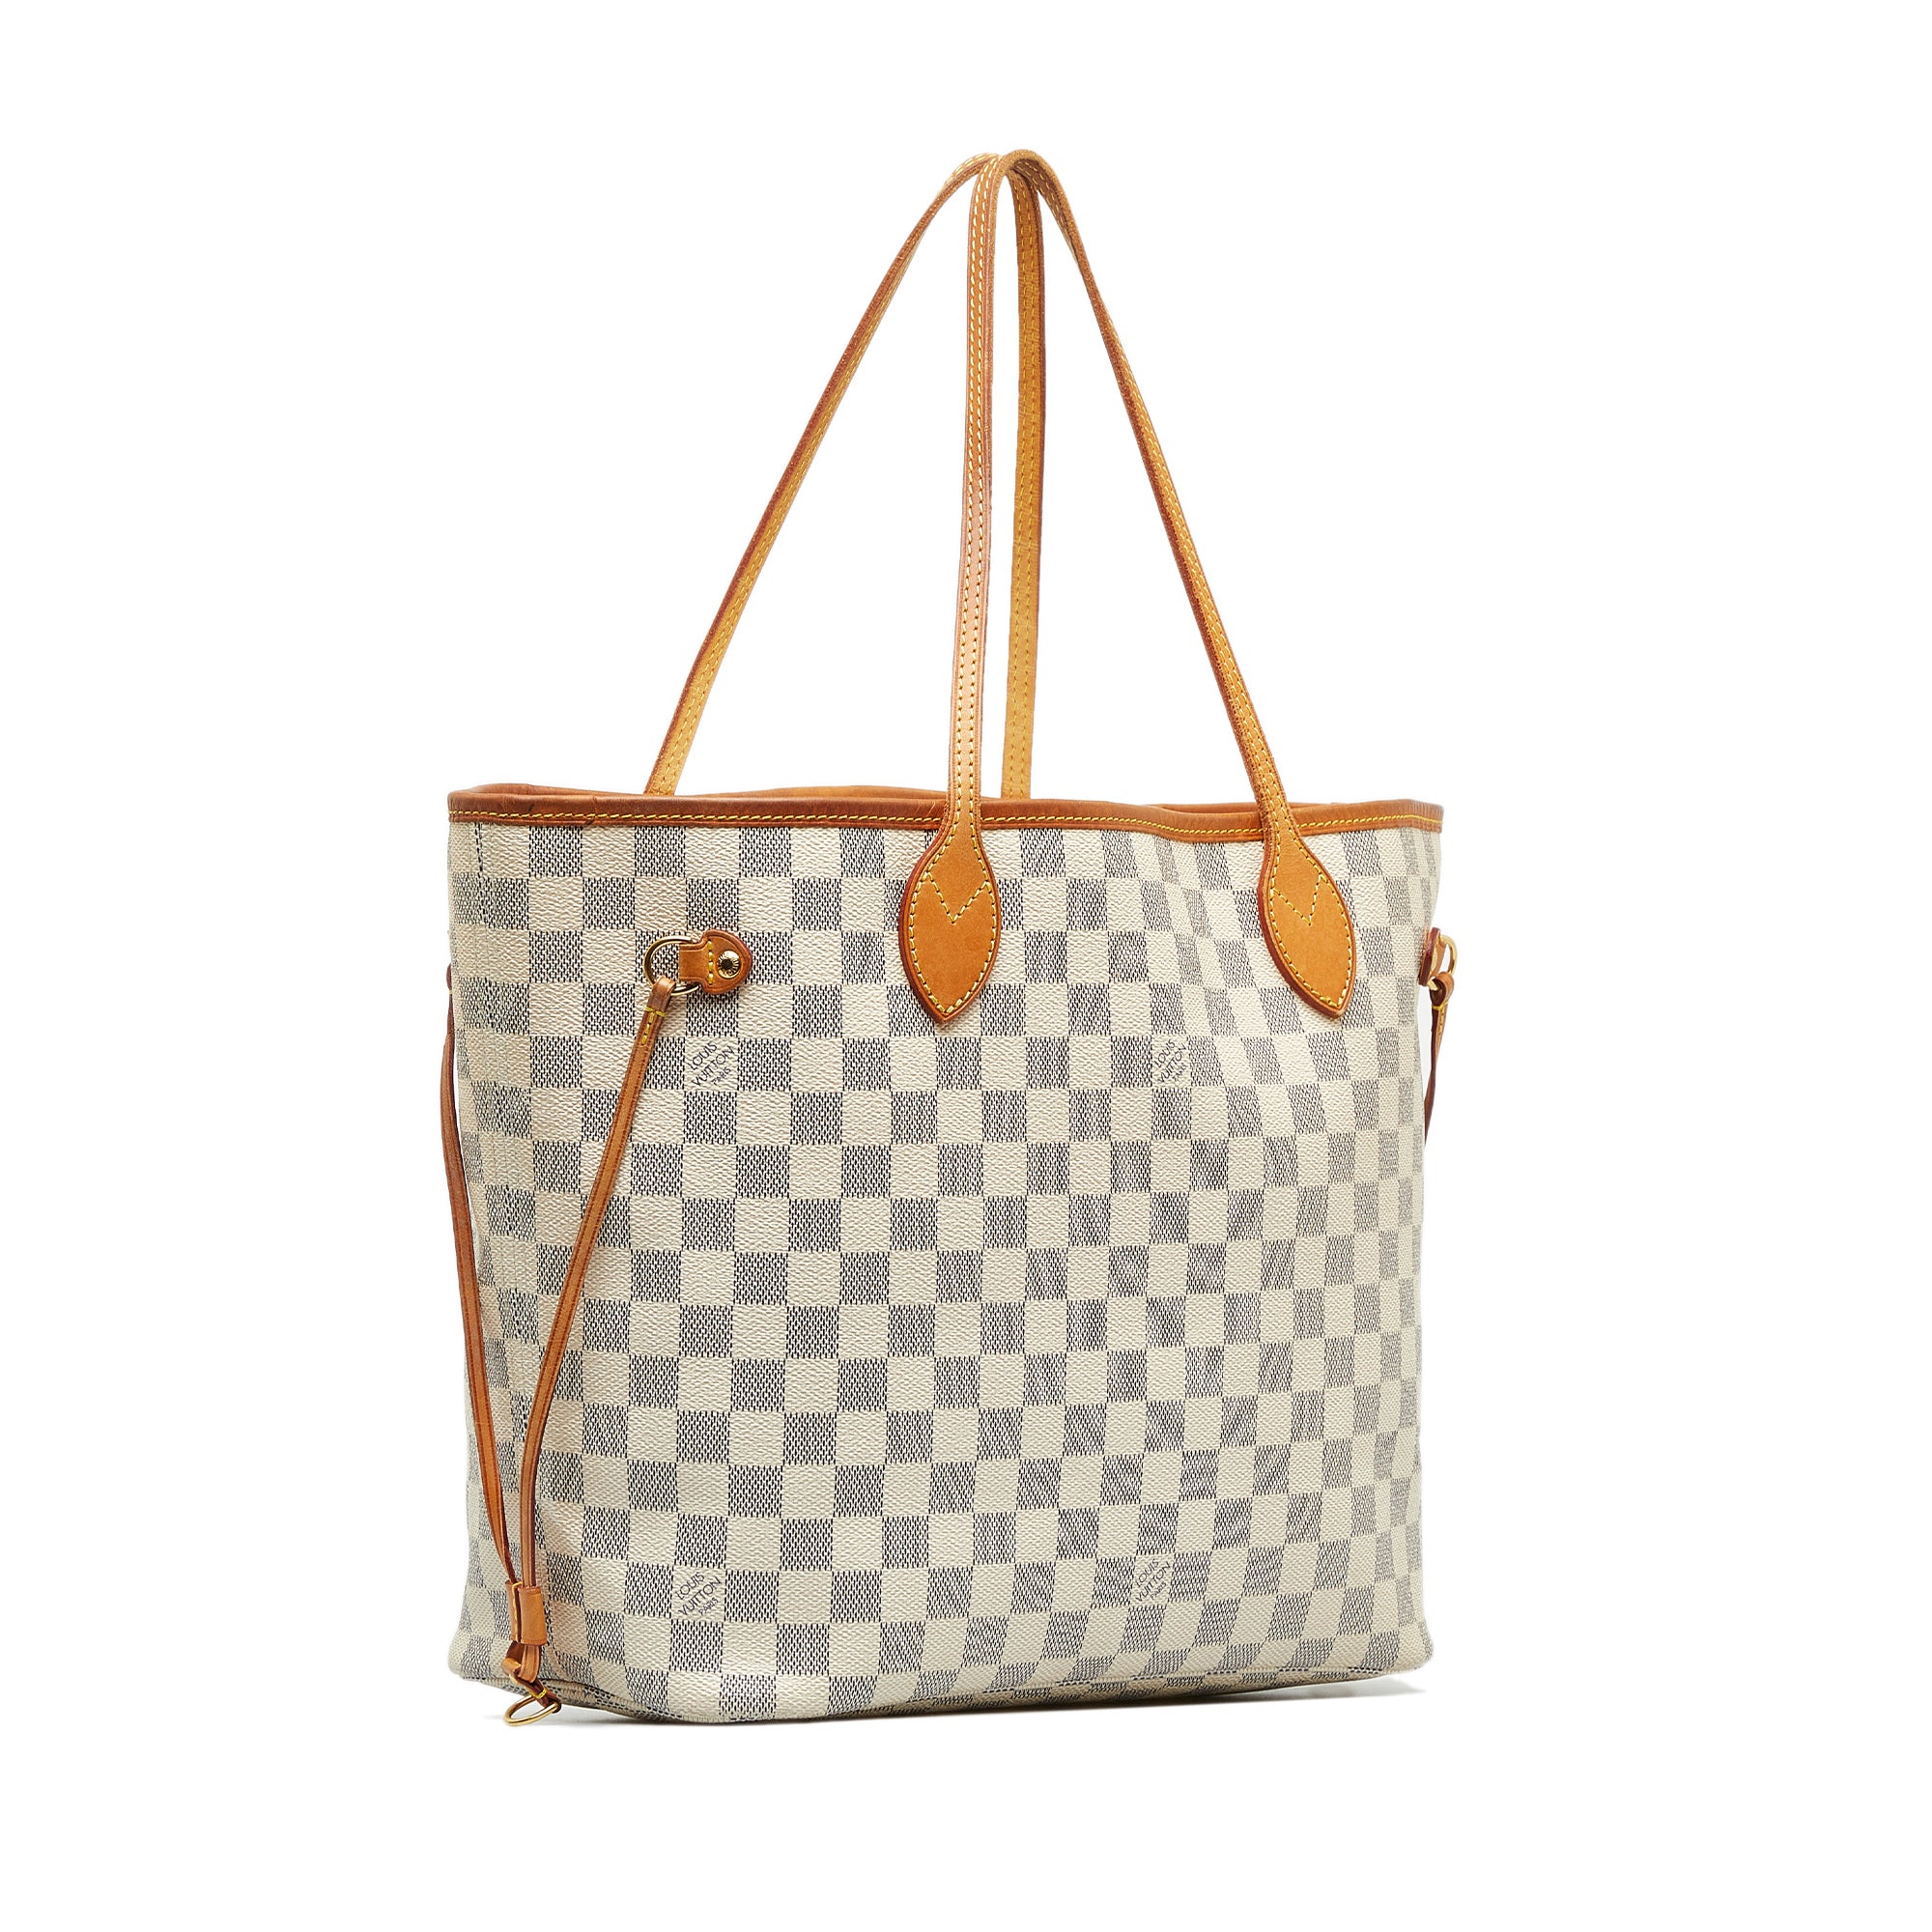 LV NEVERFULL GM vs MARC JACOBS LARGE TOTE BAG, SIDE BY SIDE